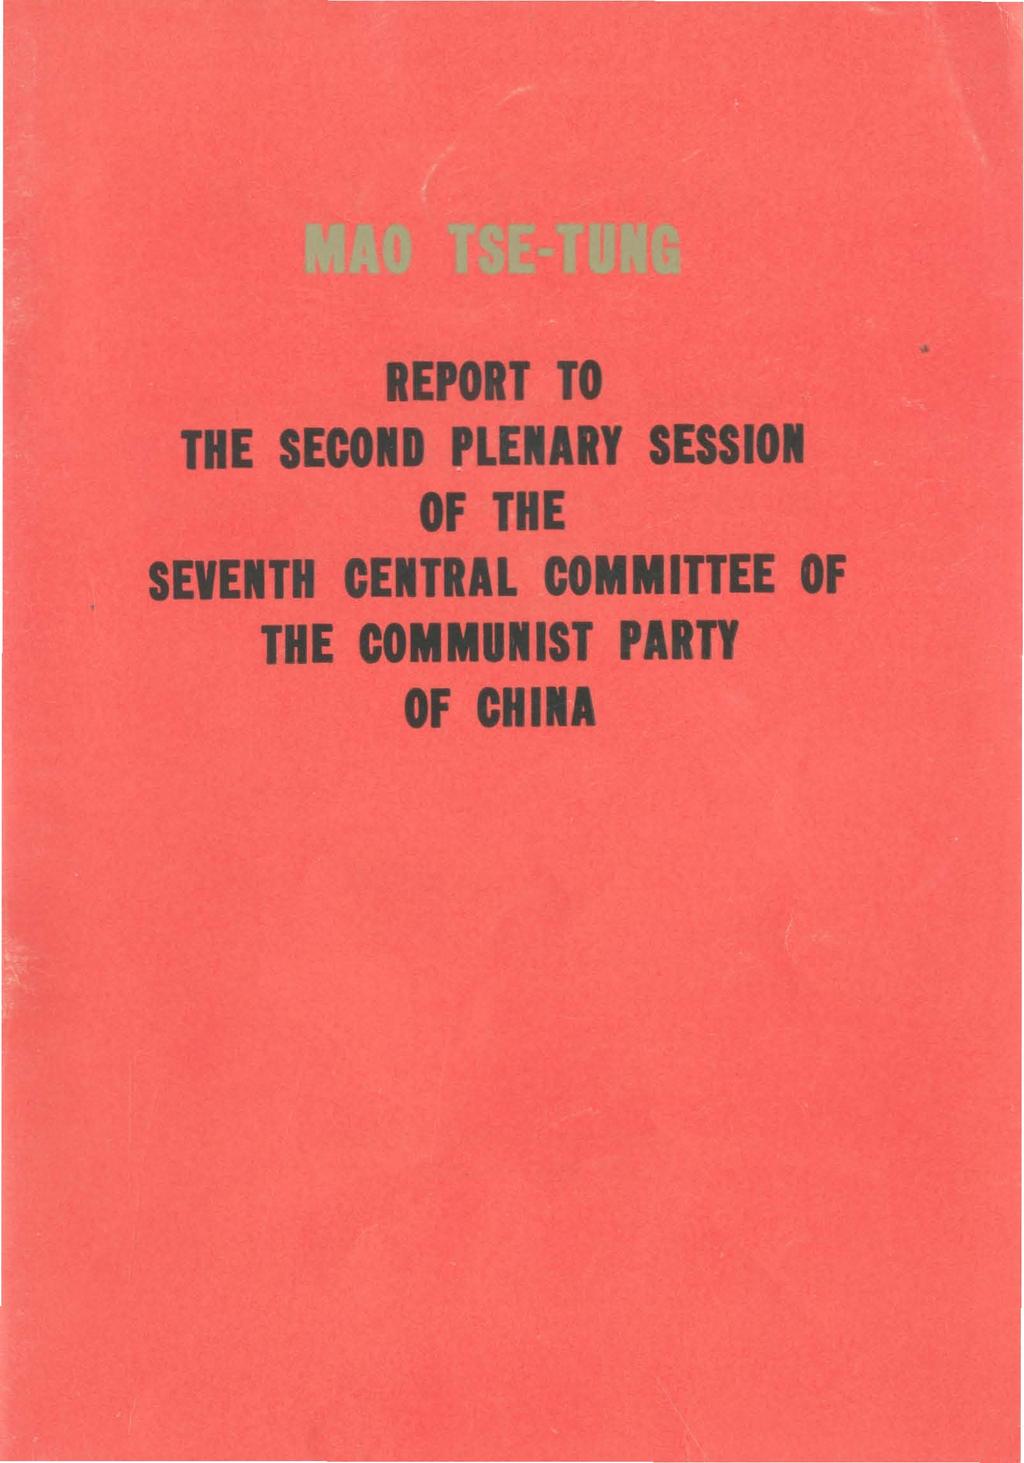 REPORT TO THE SECOND PLENARY SESSION OF THE